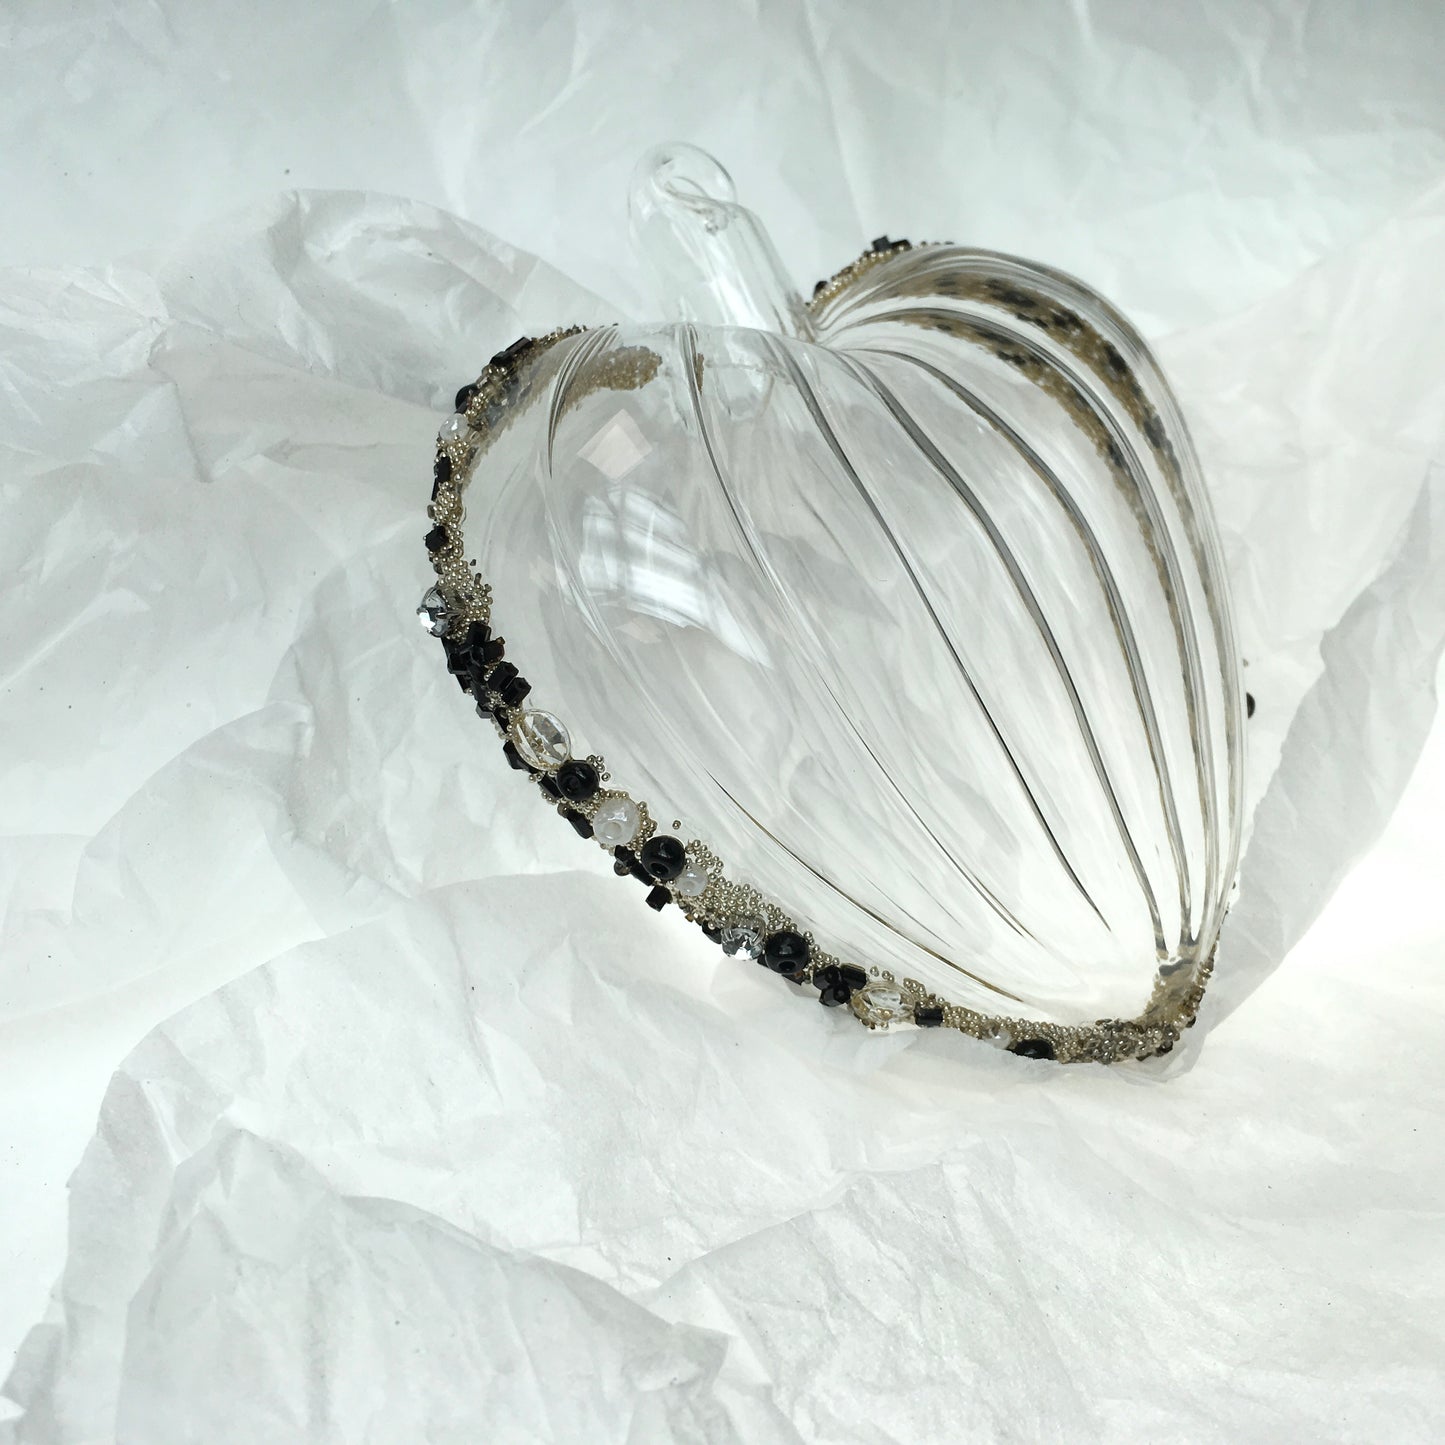 Hand-blown glass heart decorations with black beads for Christmas, Valentines Day and love themed decorating